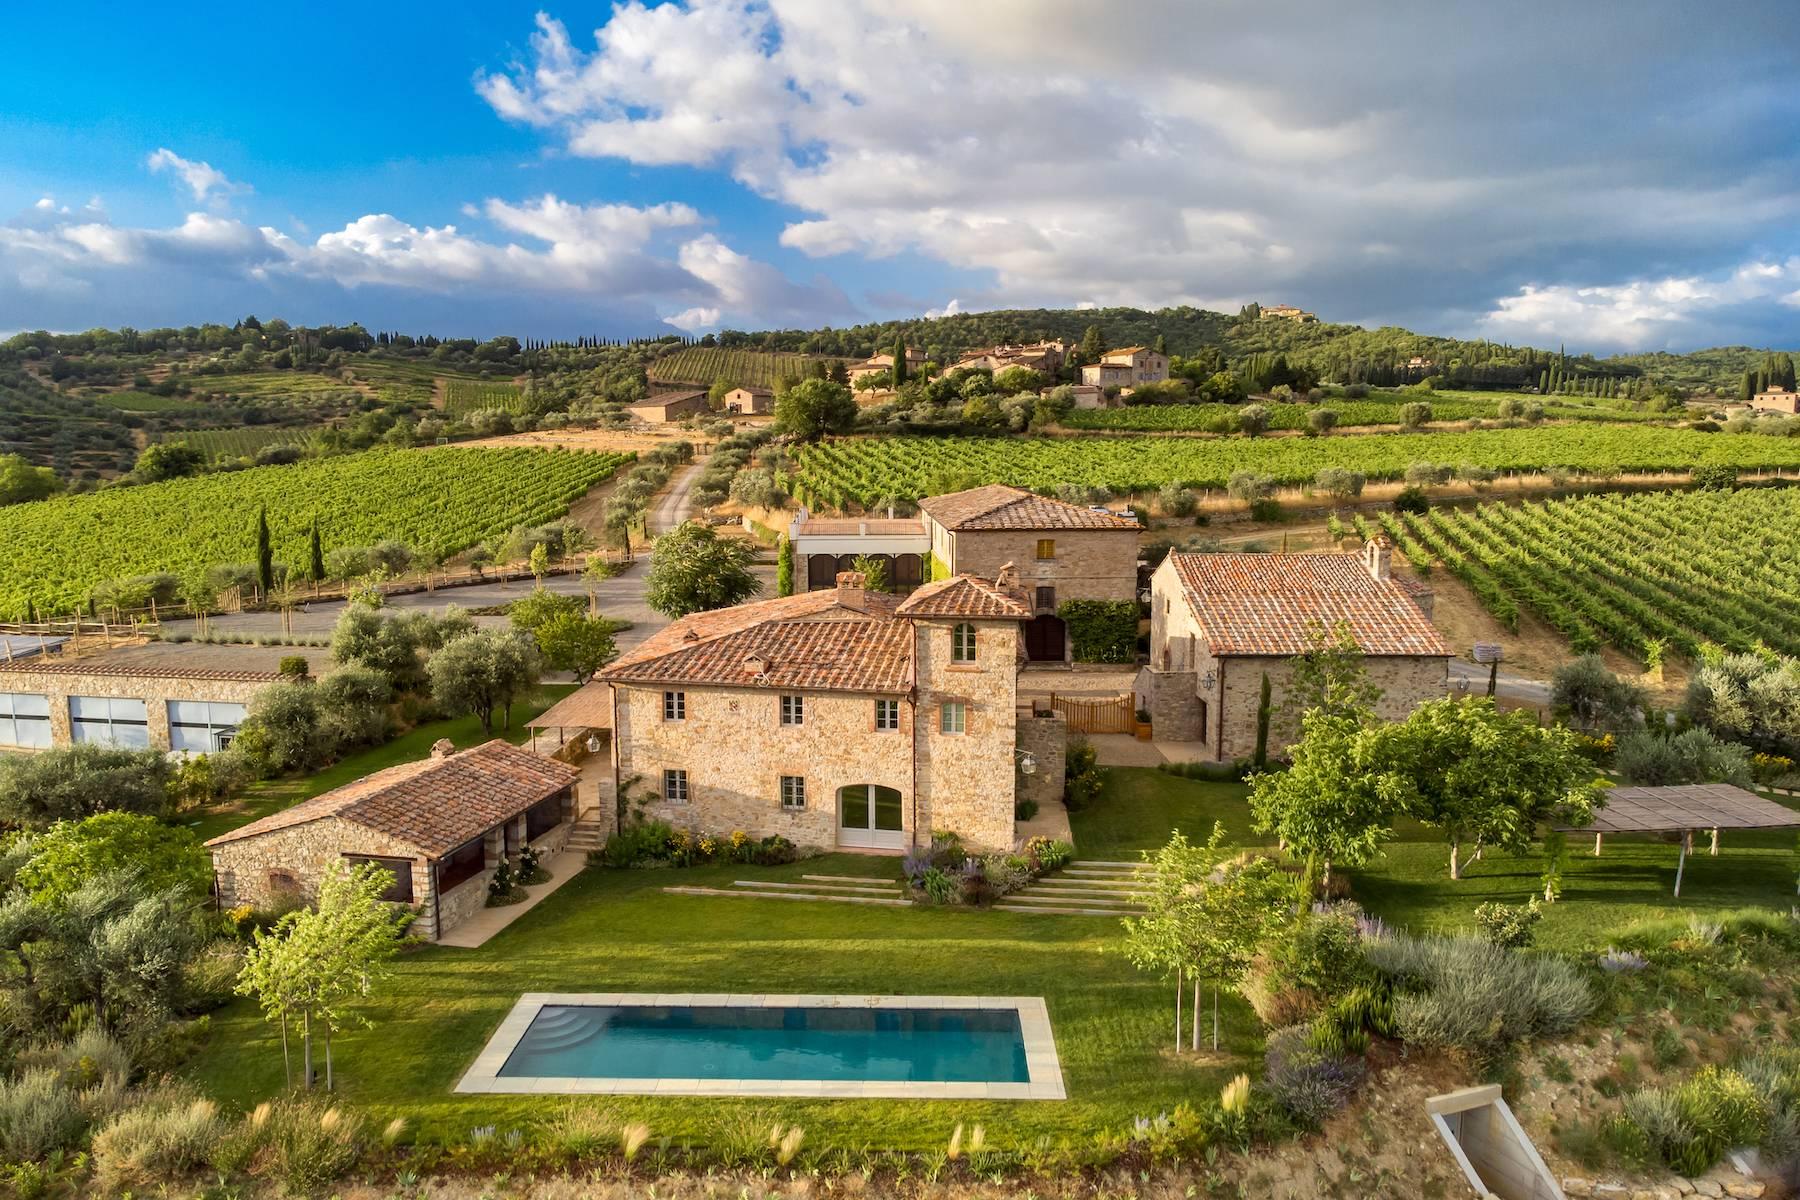 Enchanting villa in the countryside of Siena - 2